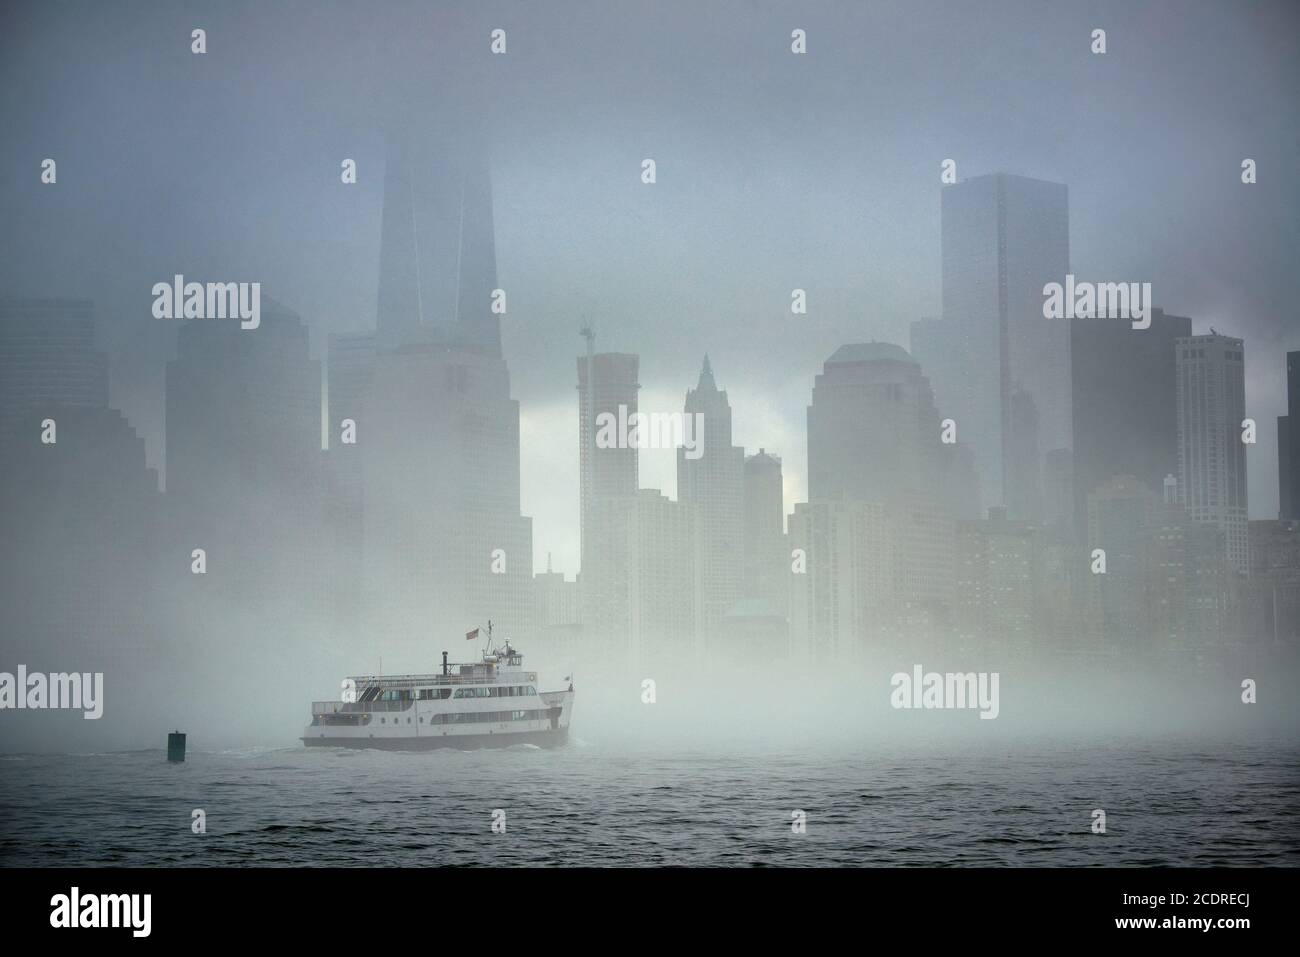 Downtown Manhattan skyscraper and boat in river in a foggy day in New York City. Stock Photo